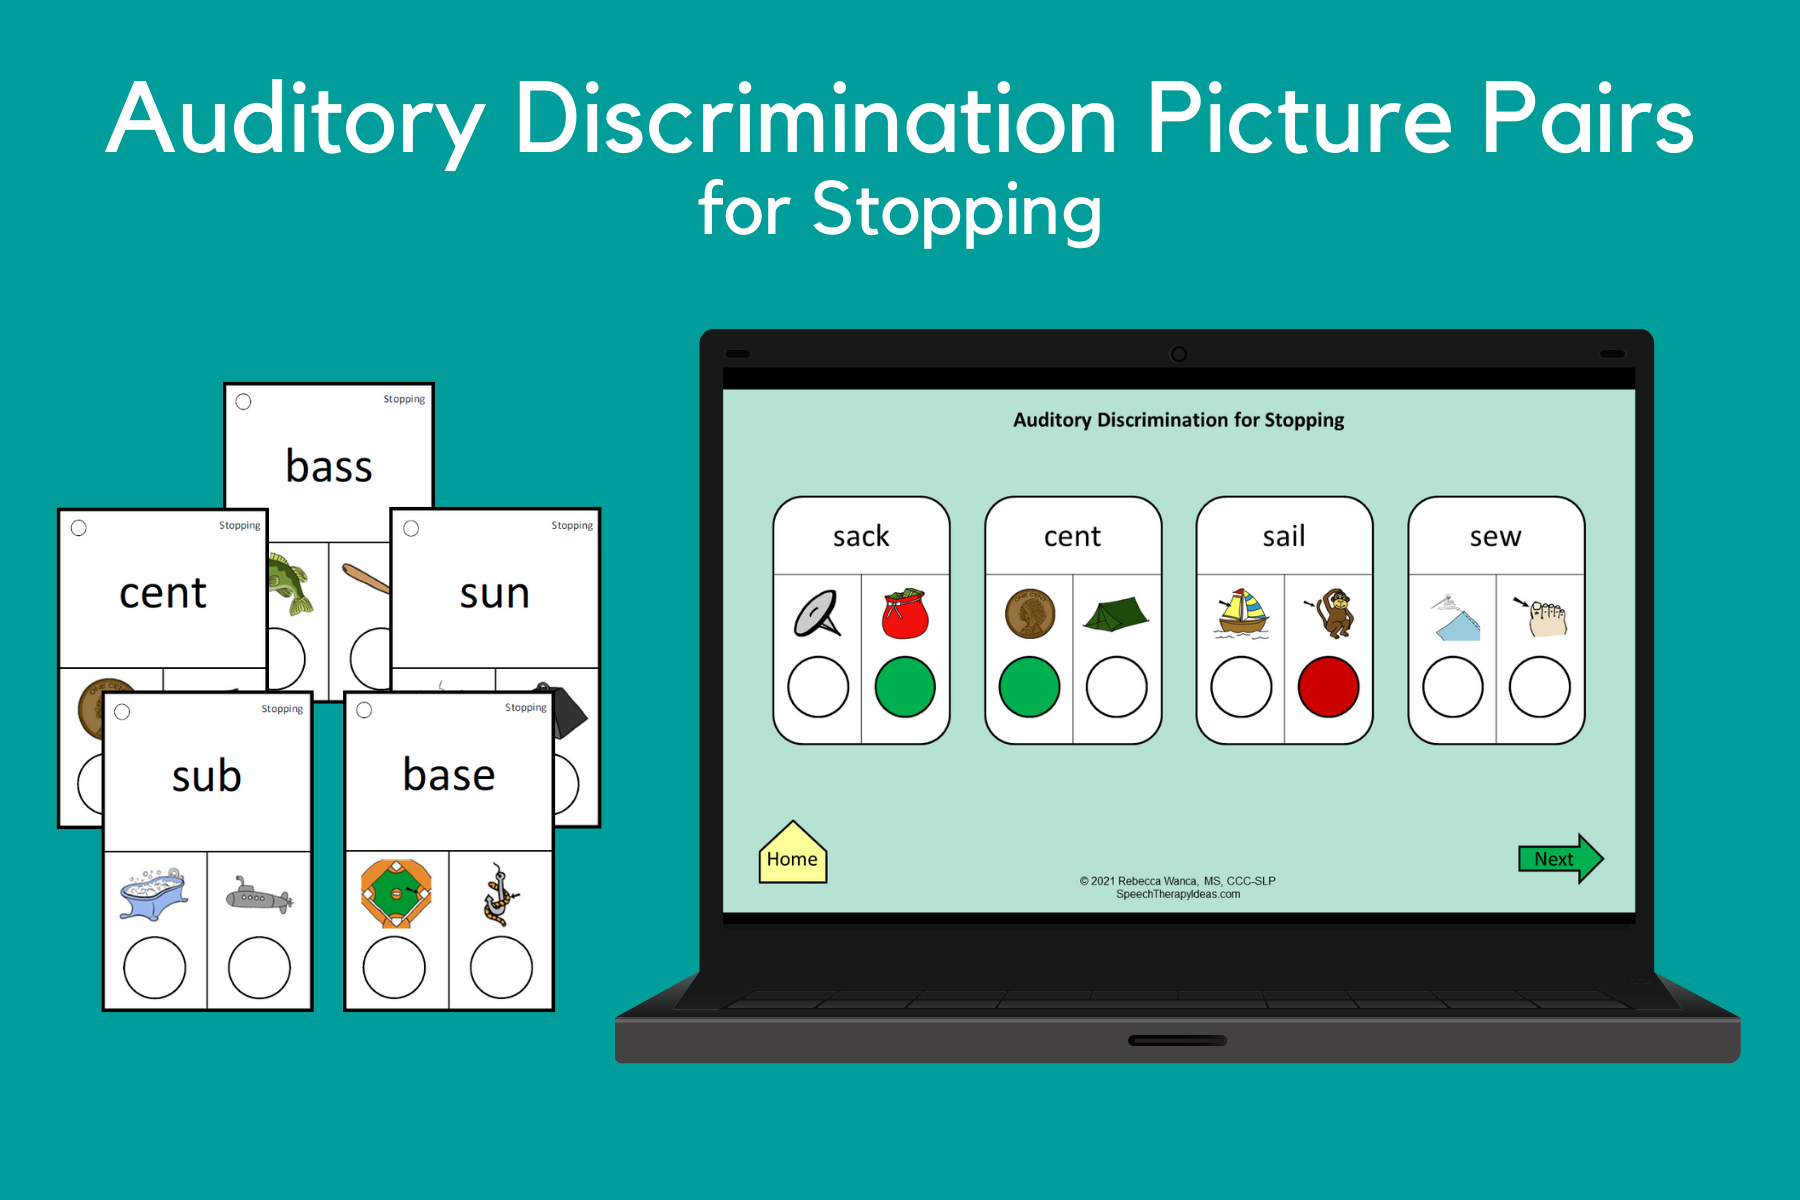 Auditory Discrimination Picture Pairs for Stopping